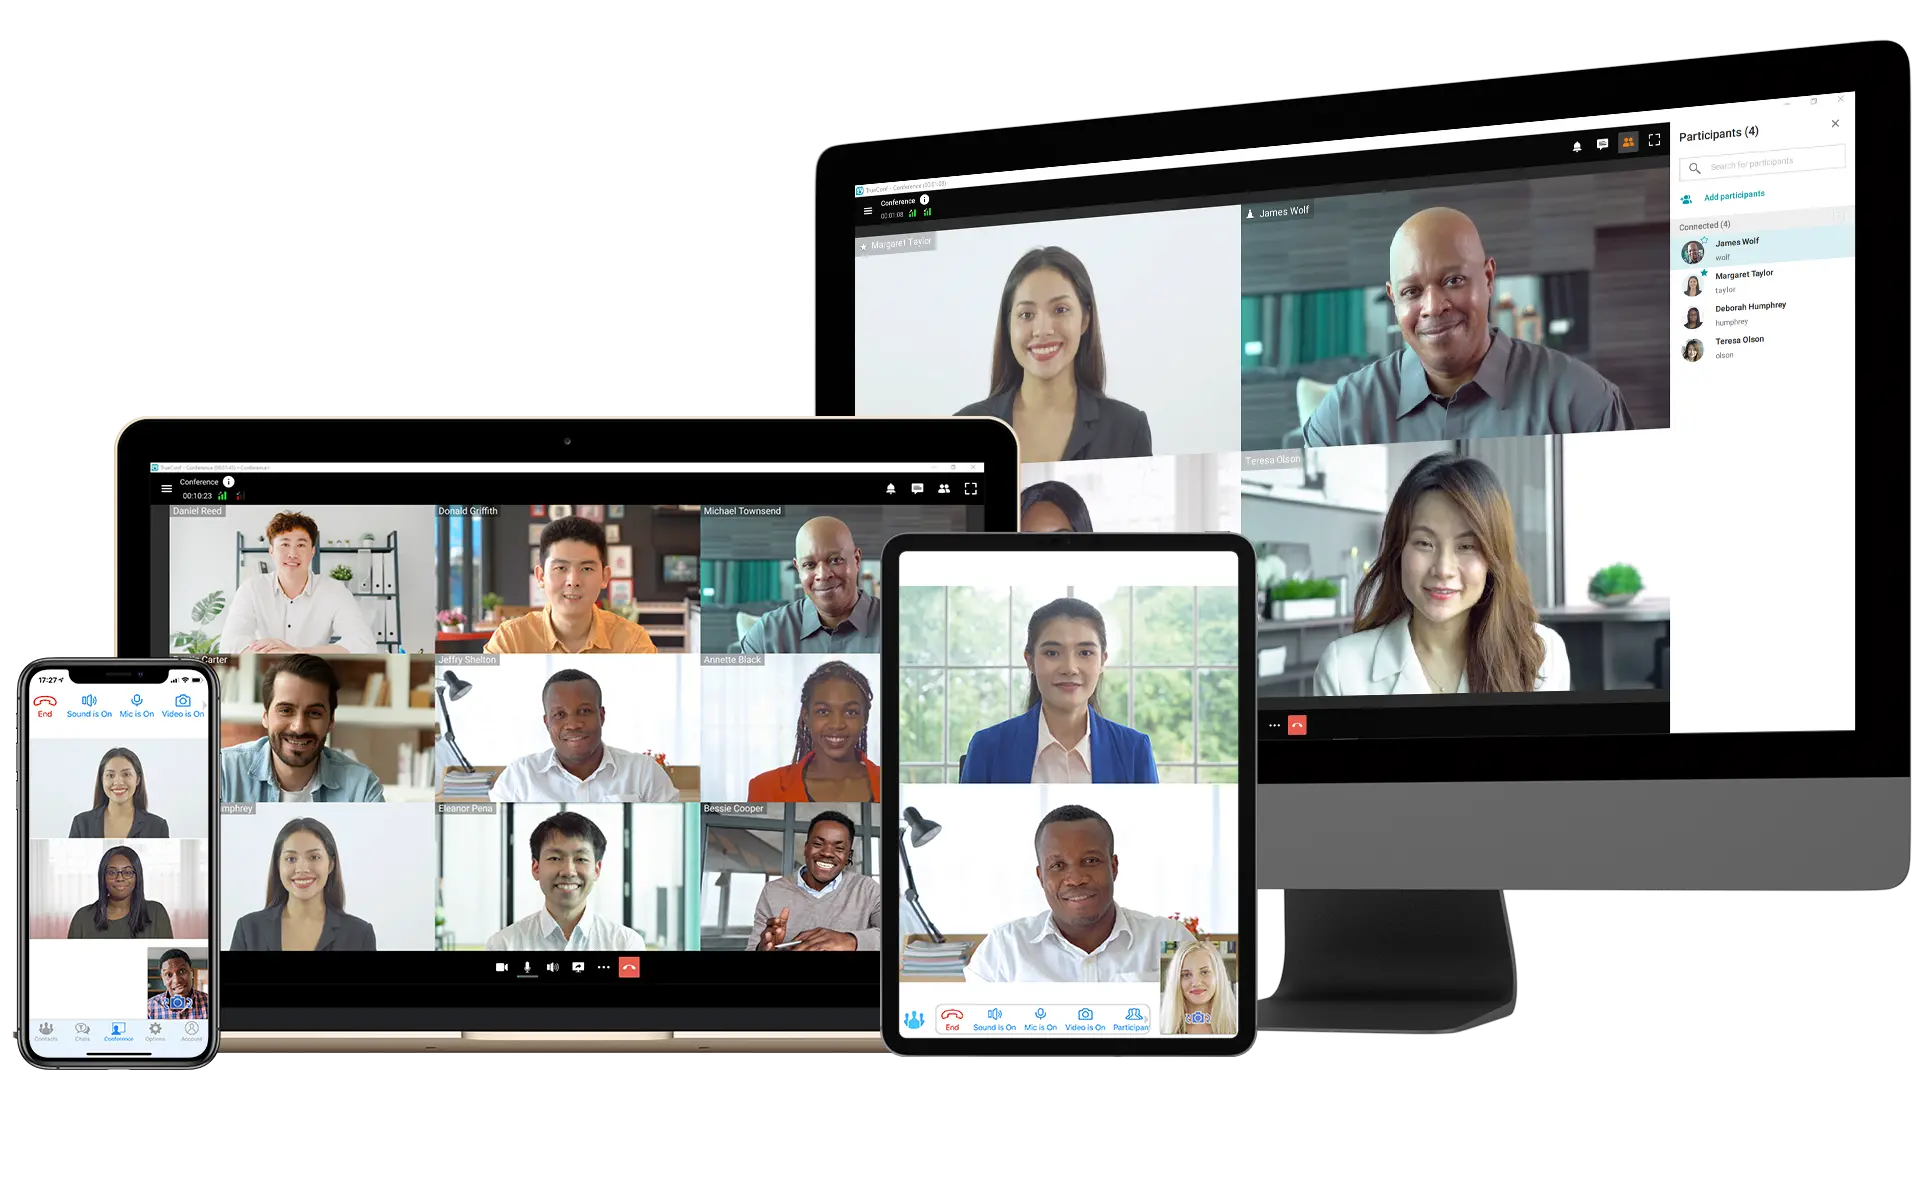 How do you set up a teleconference?